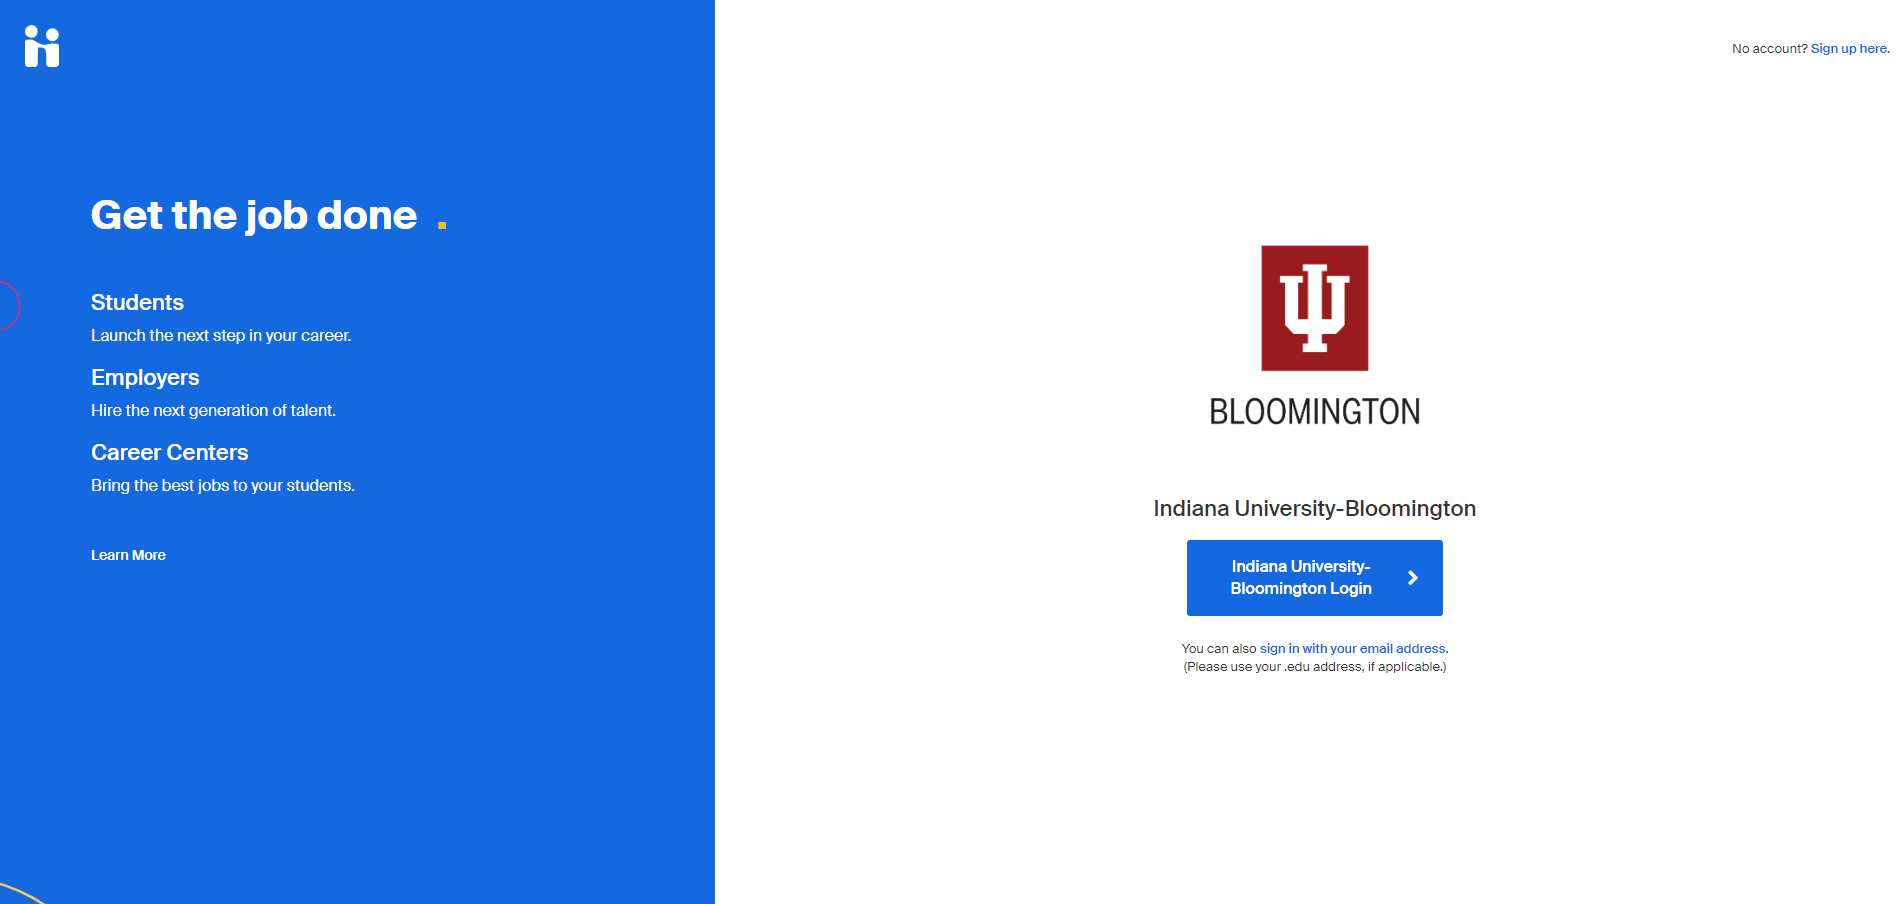 Screenshot of Handshake login page. Click the "Indiana University - Bloomington Login" button and use your IU username and passphrase to continue